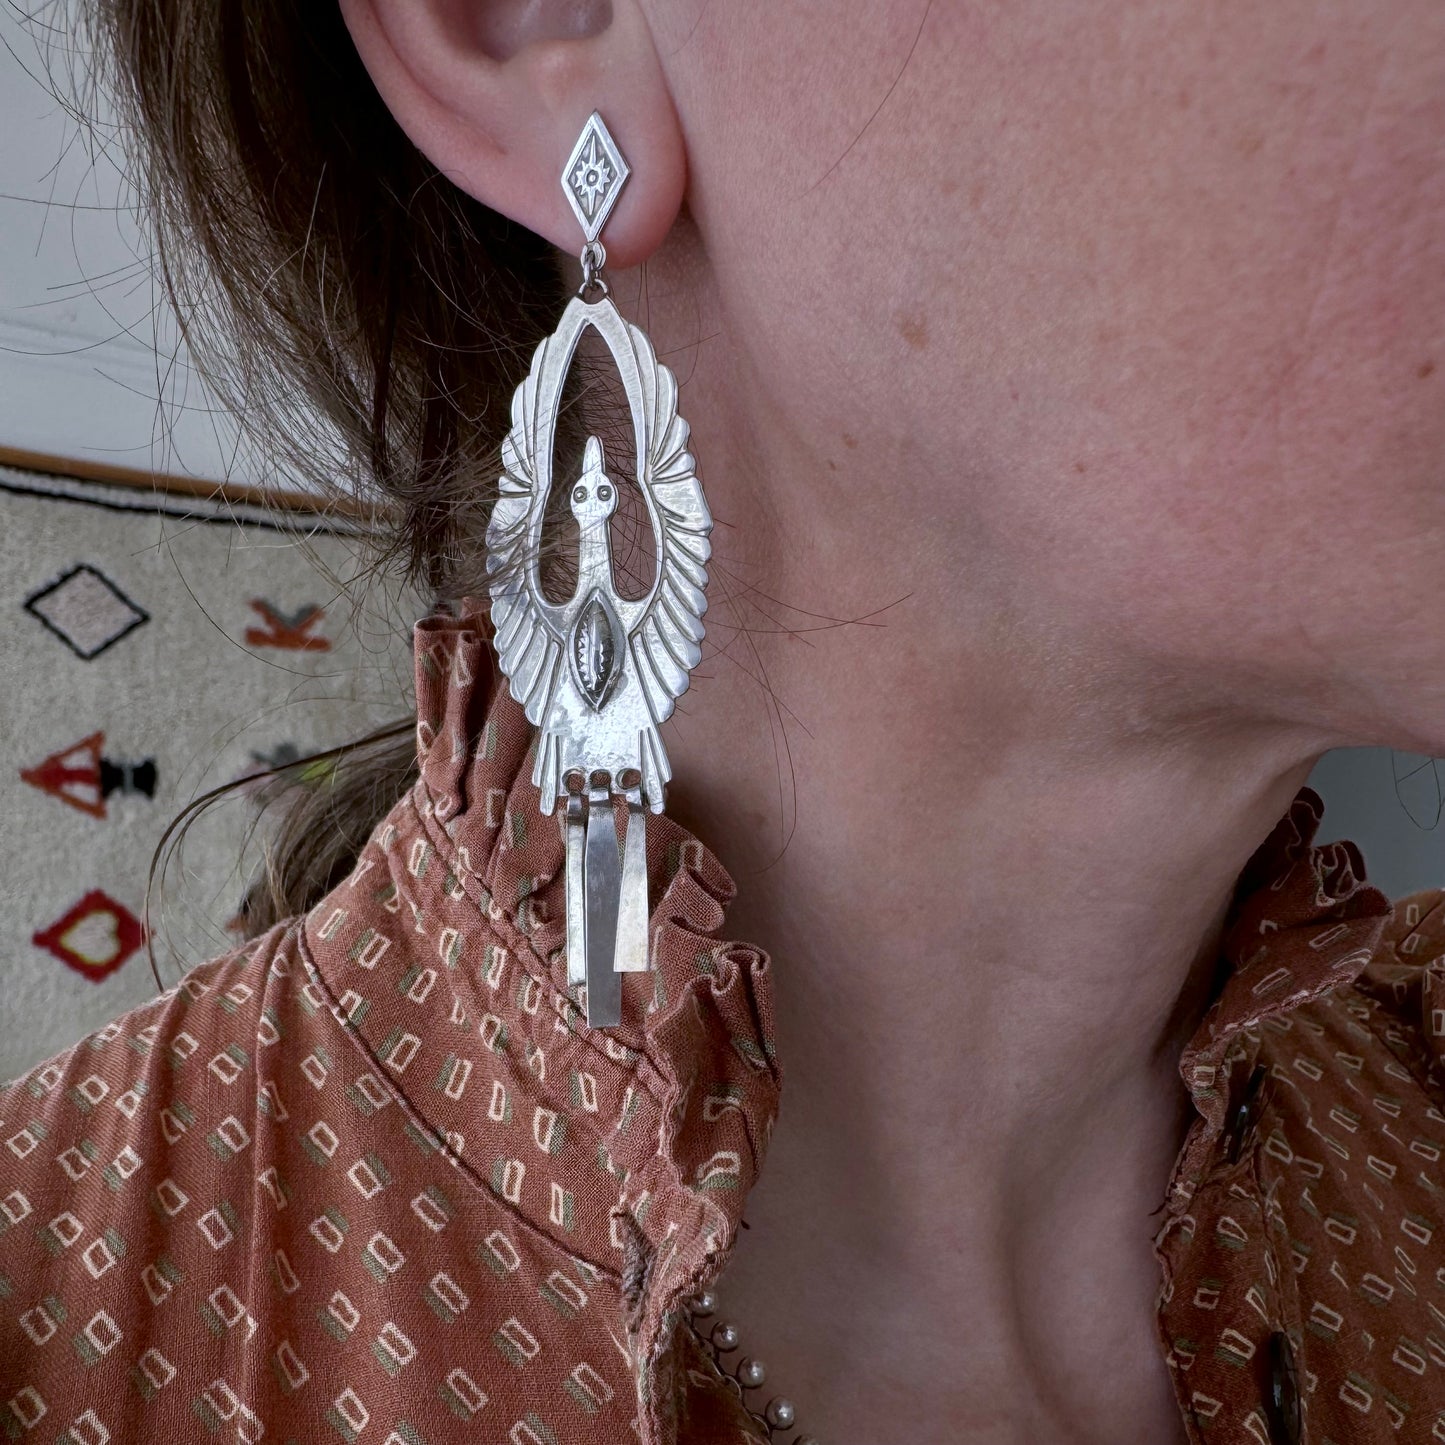 V I N T A G E // fly high / sterling silver thunderbird or phoenix rising statement earrings